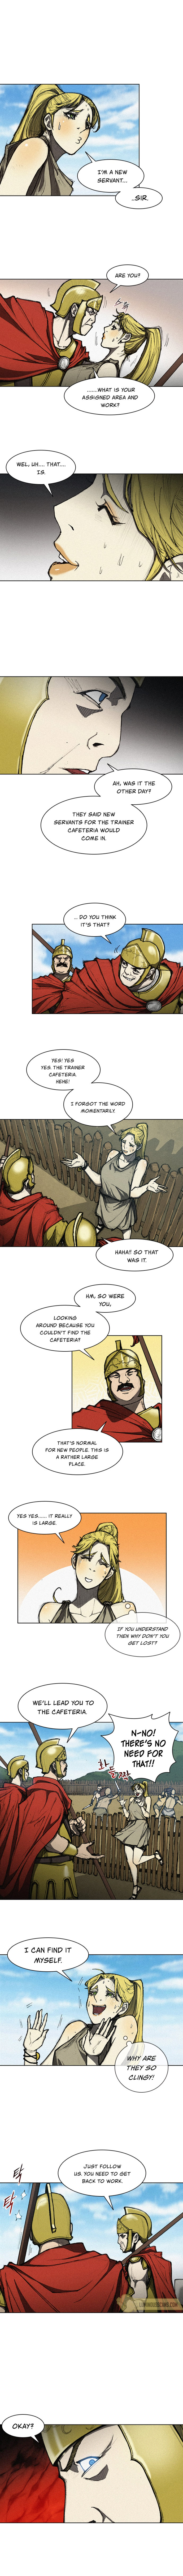 Long Way of the Warrior - Chapter 8 Page 6